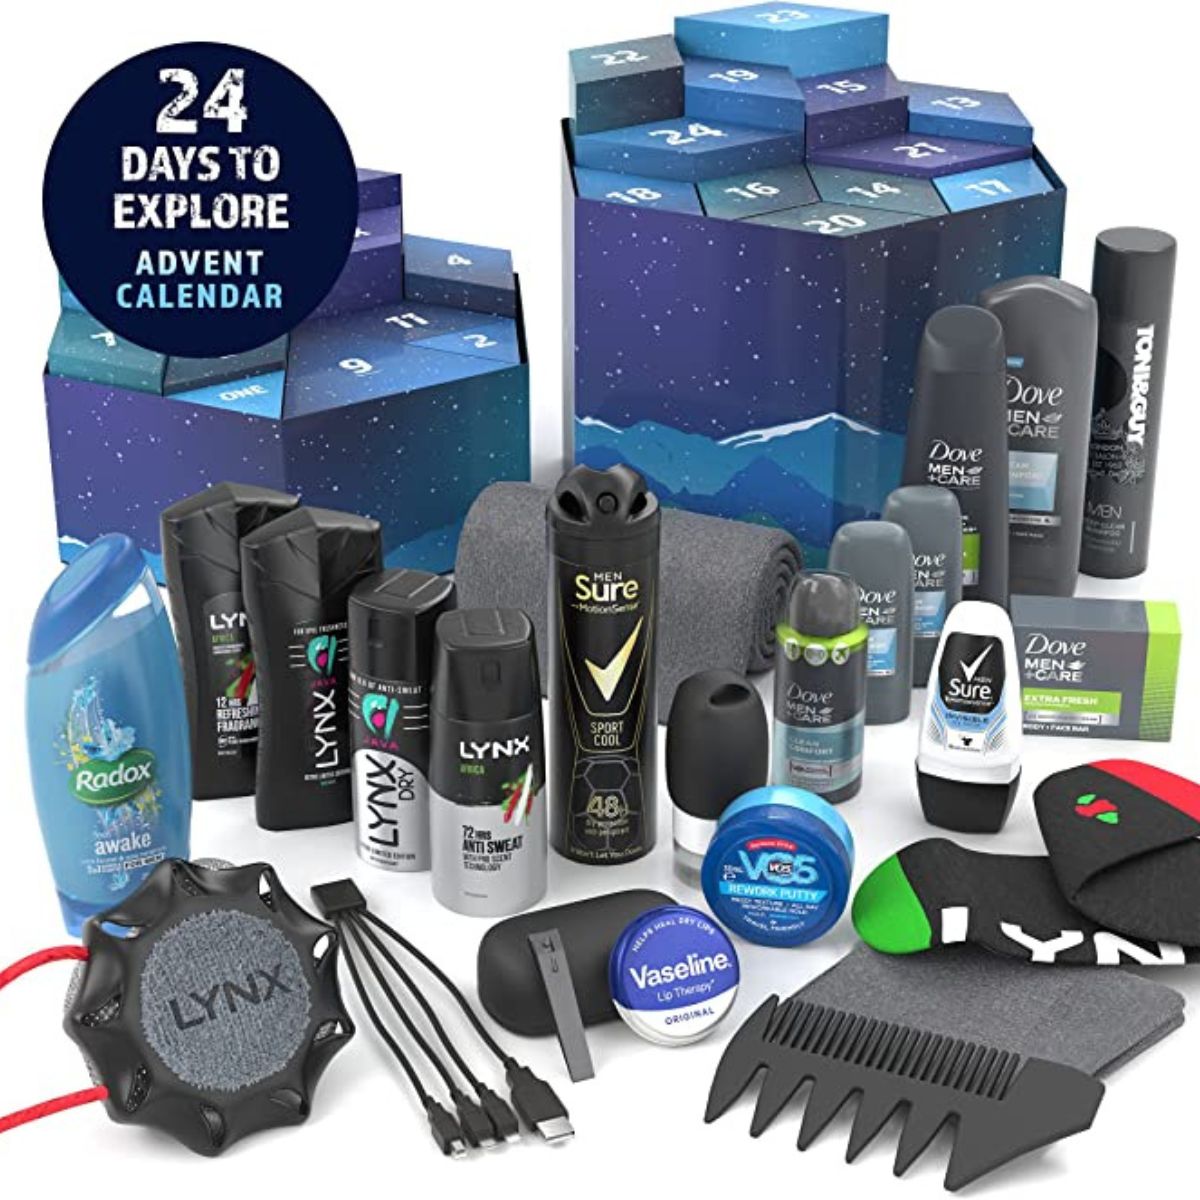 24-days-to-explore-beauty-advent-calendar-2022-grooming-product-review-man-for-himself